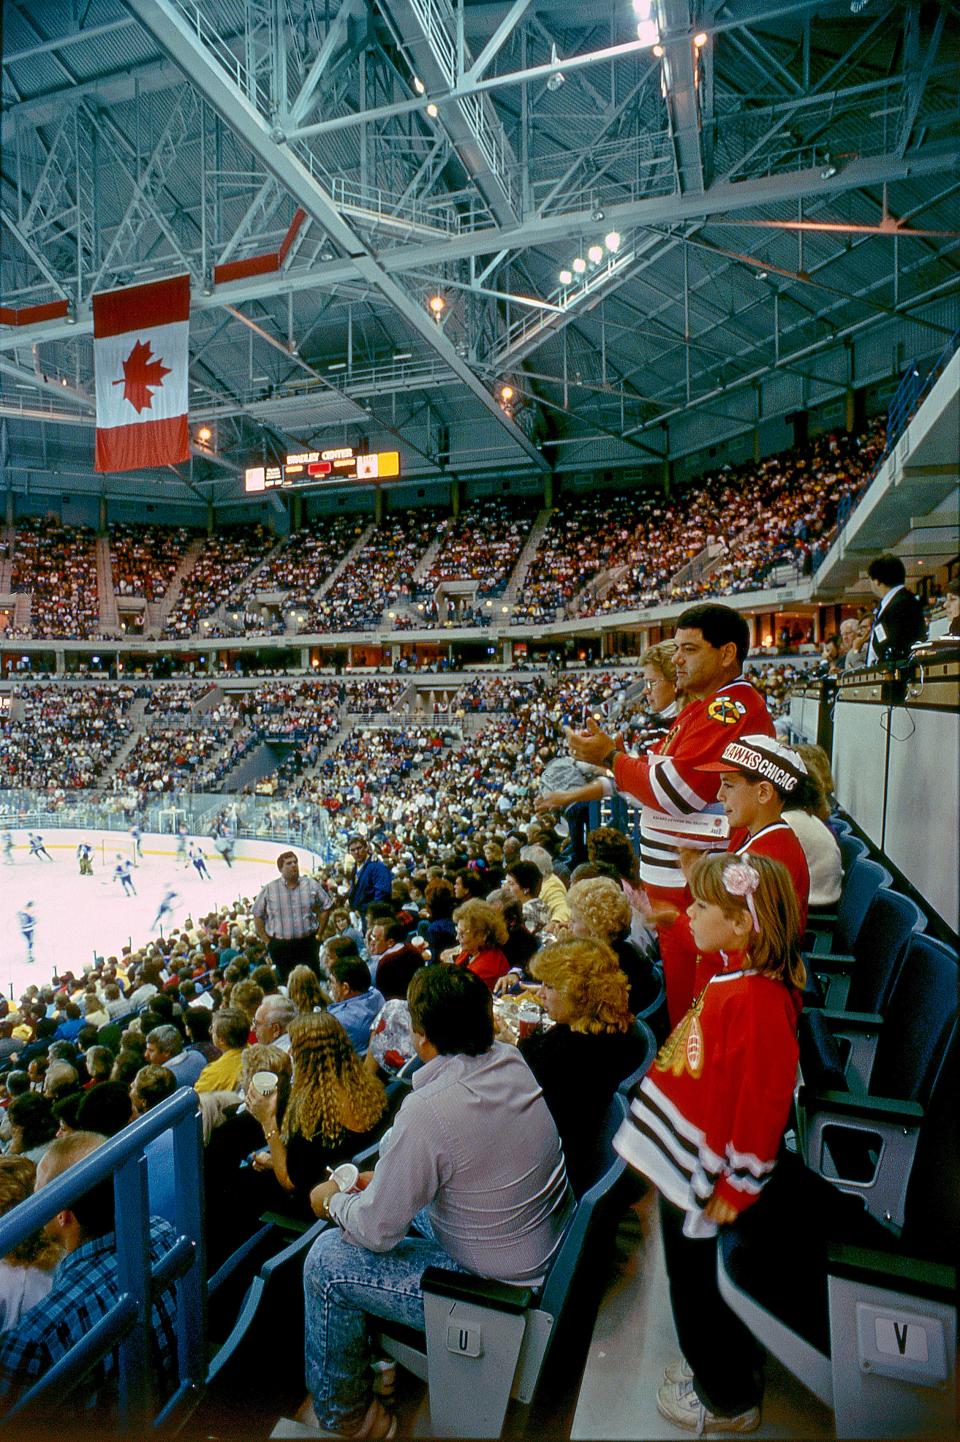 Fans take in opening night at the Bradley Center, an NHL exhibition game between the Chicago Blackhawks and Edmonton Oilers on Oct. 2, 1988.